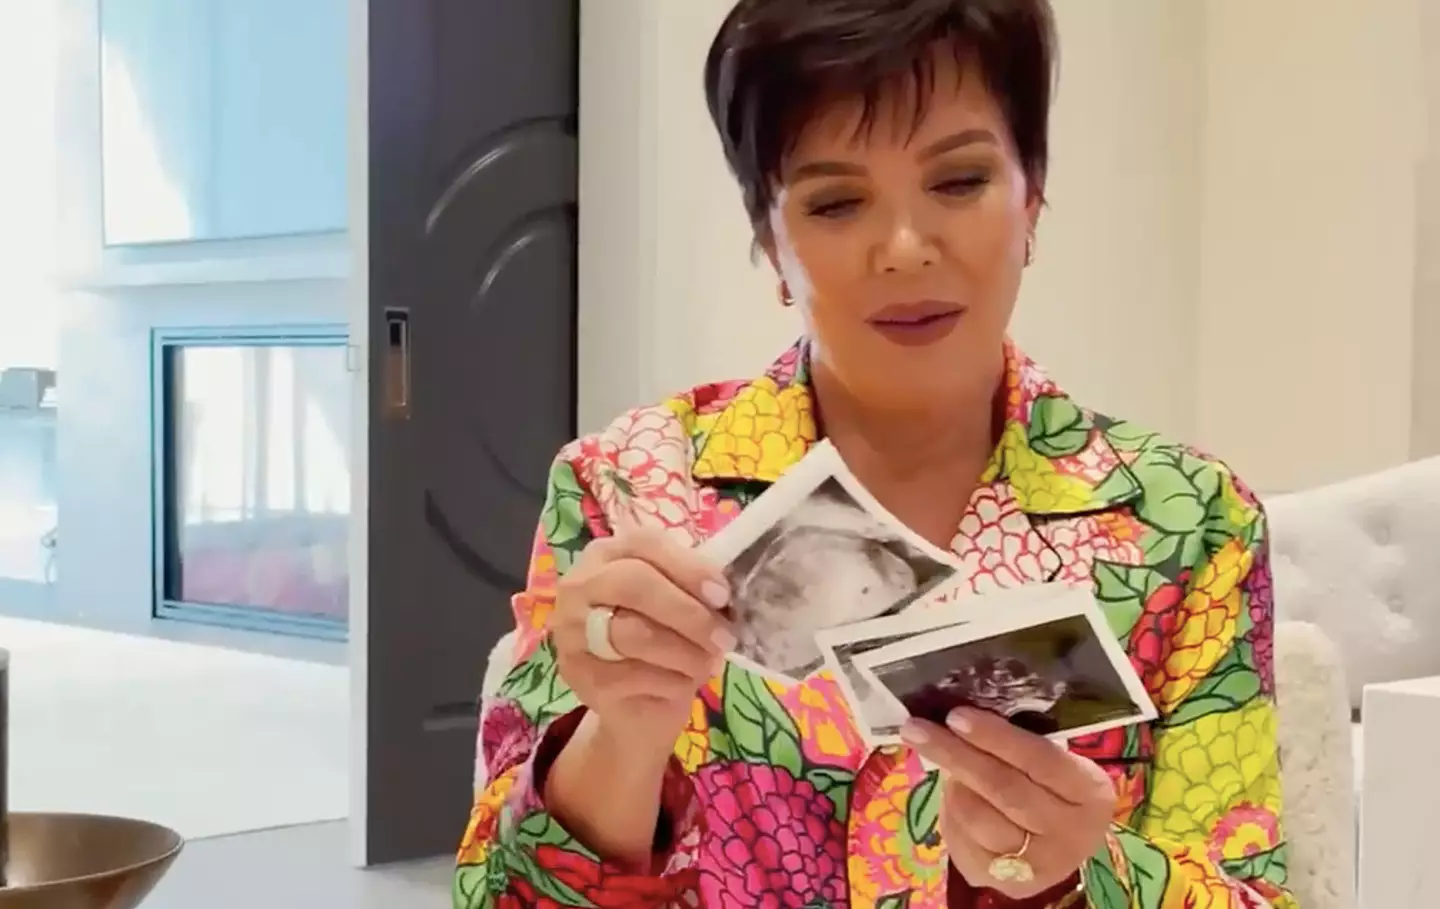 In the 90 second clip, Stormi hands Kris an envelope filled with scan photos (